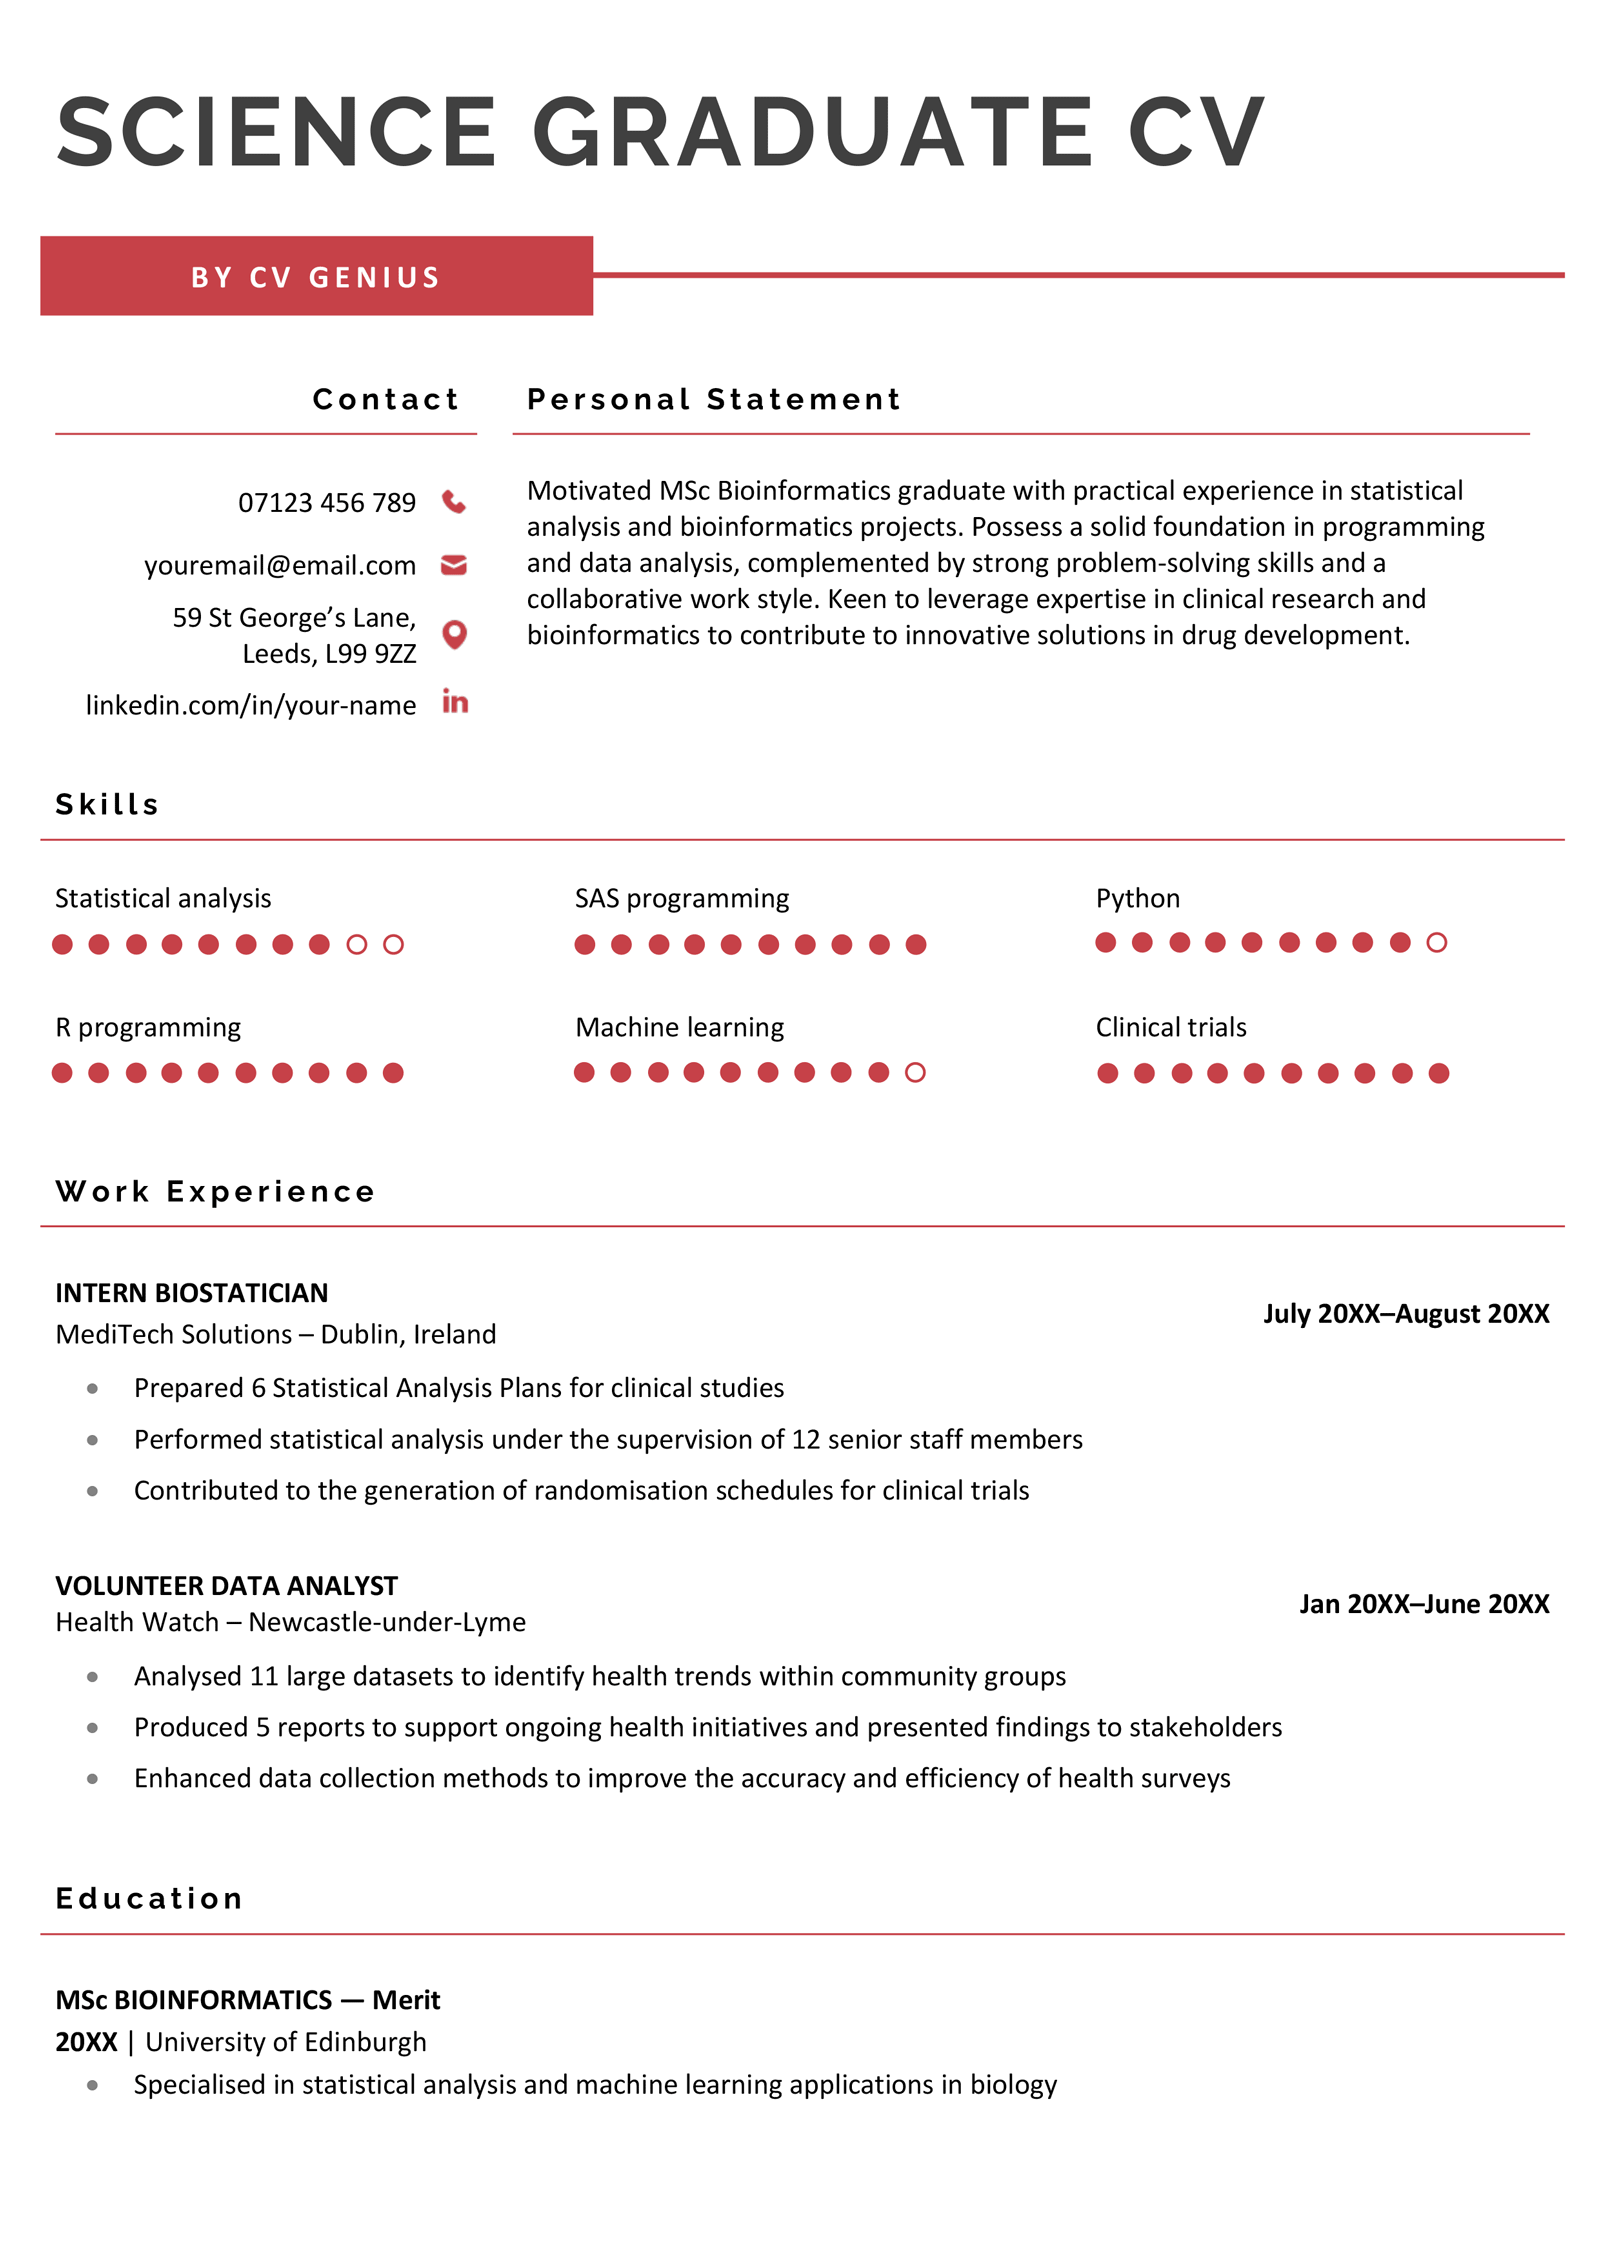 A science graduate CV example with a prominent skills section that employs skills bars to rate each skill.